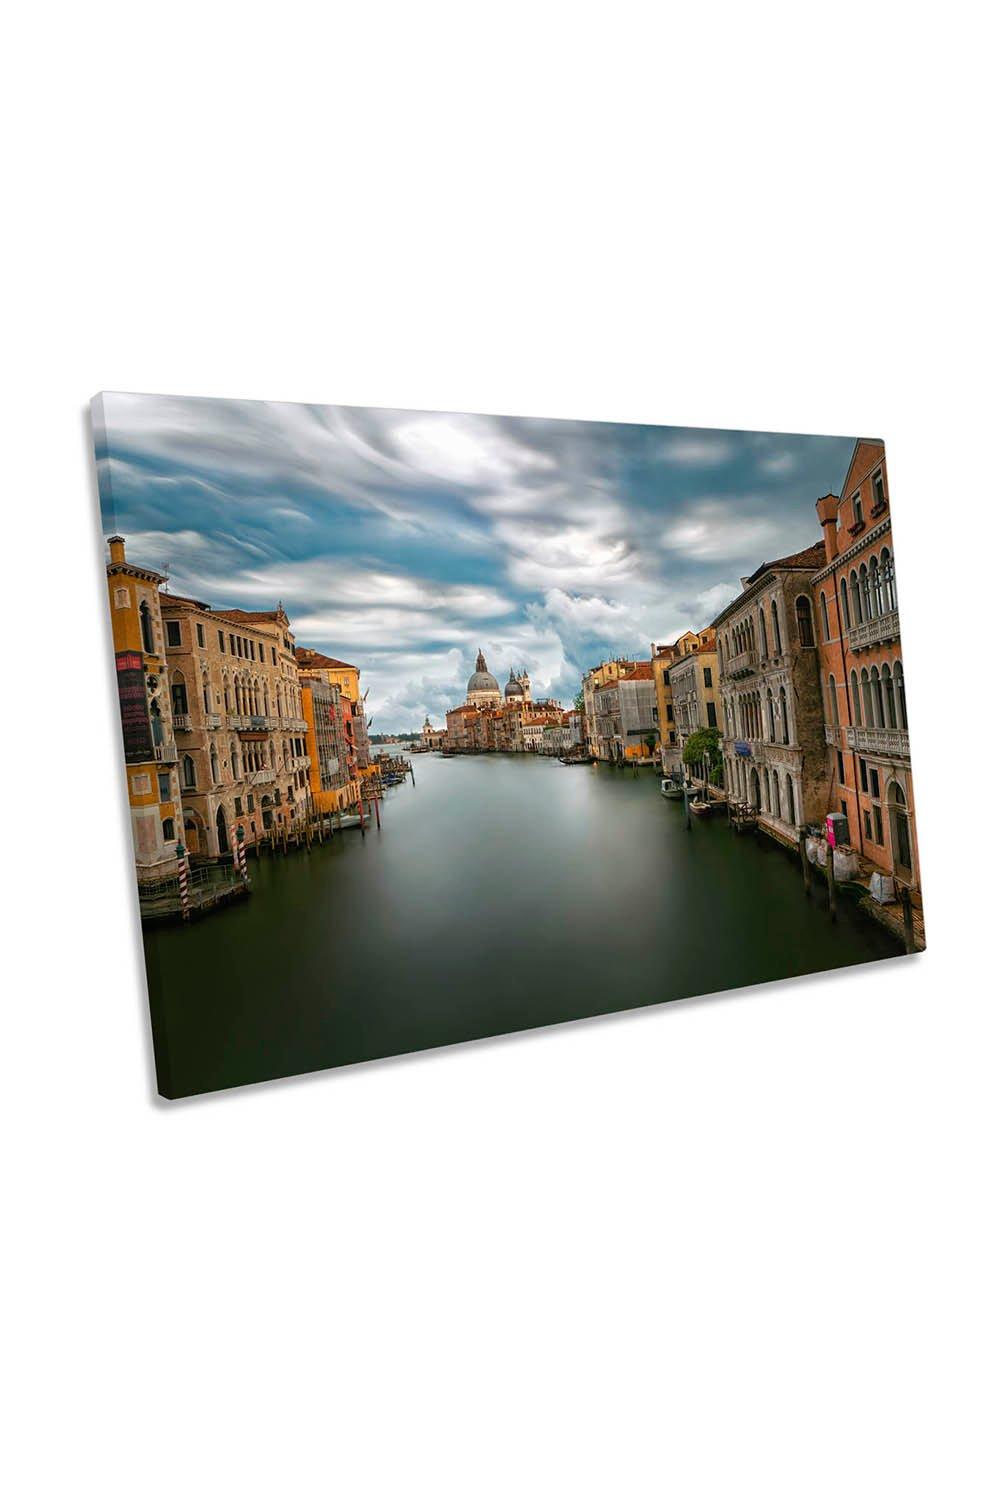 Cloudy Sky on Grand Canal Venice City Canvas Wall Art Picture Print